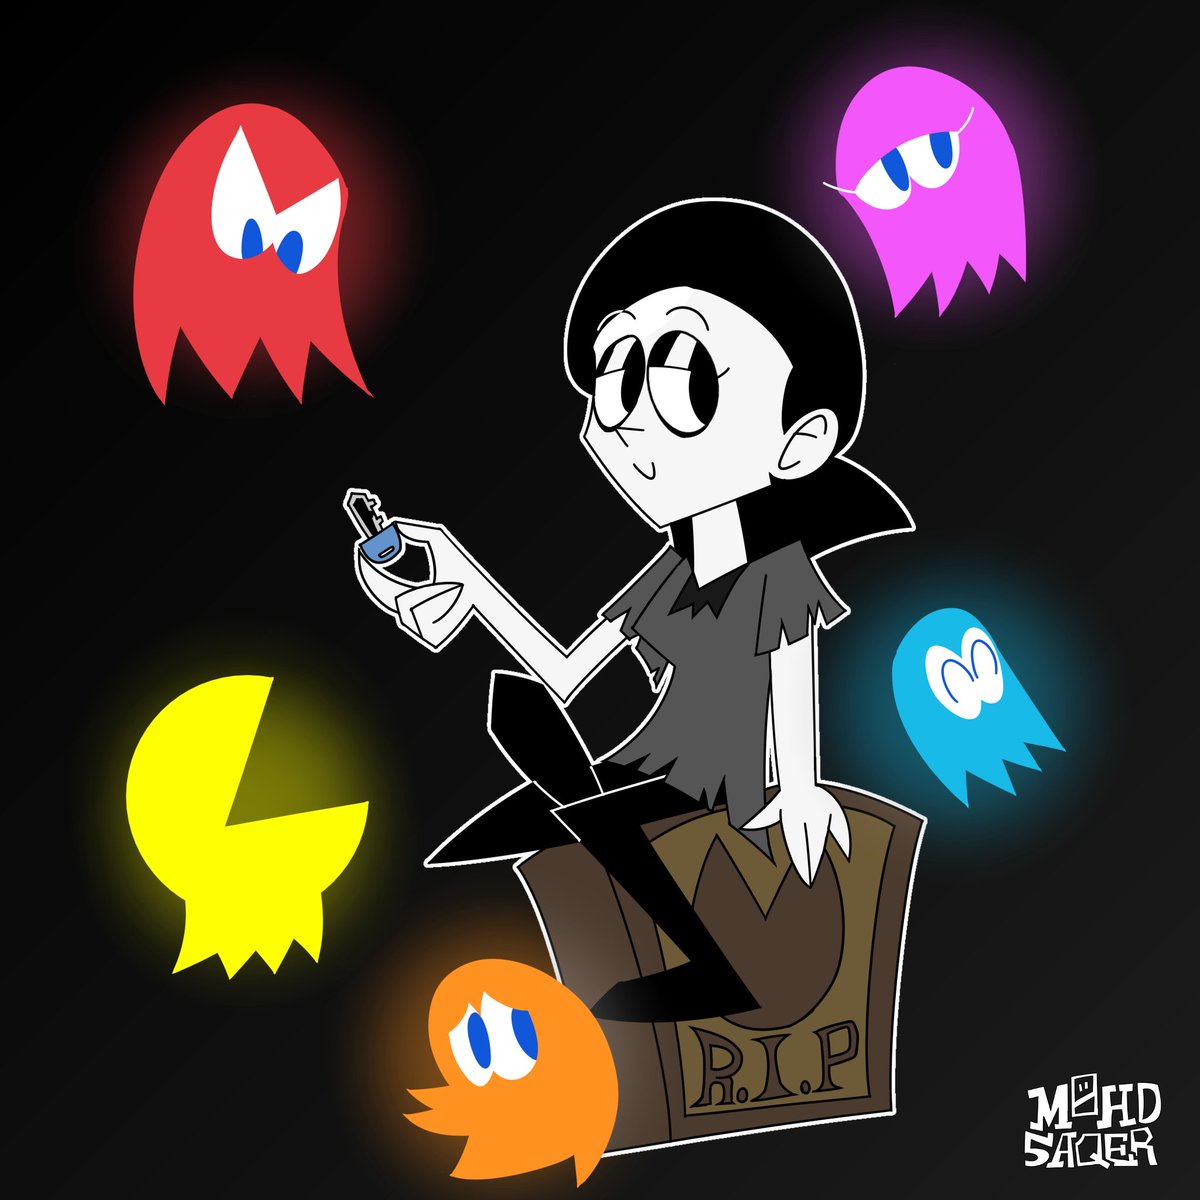 some corpse girl with the colorful undead
#pacman #necronancy64